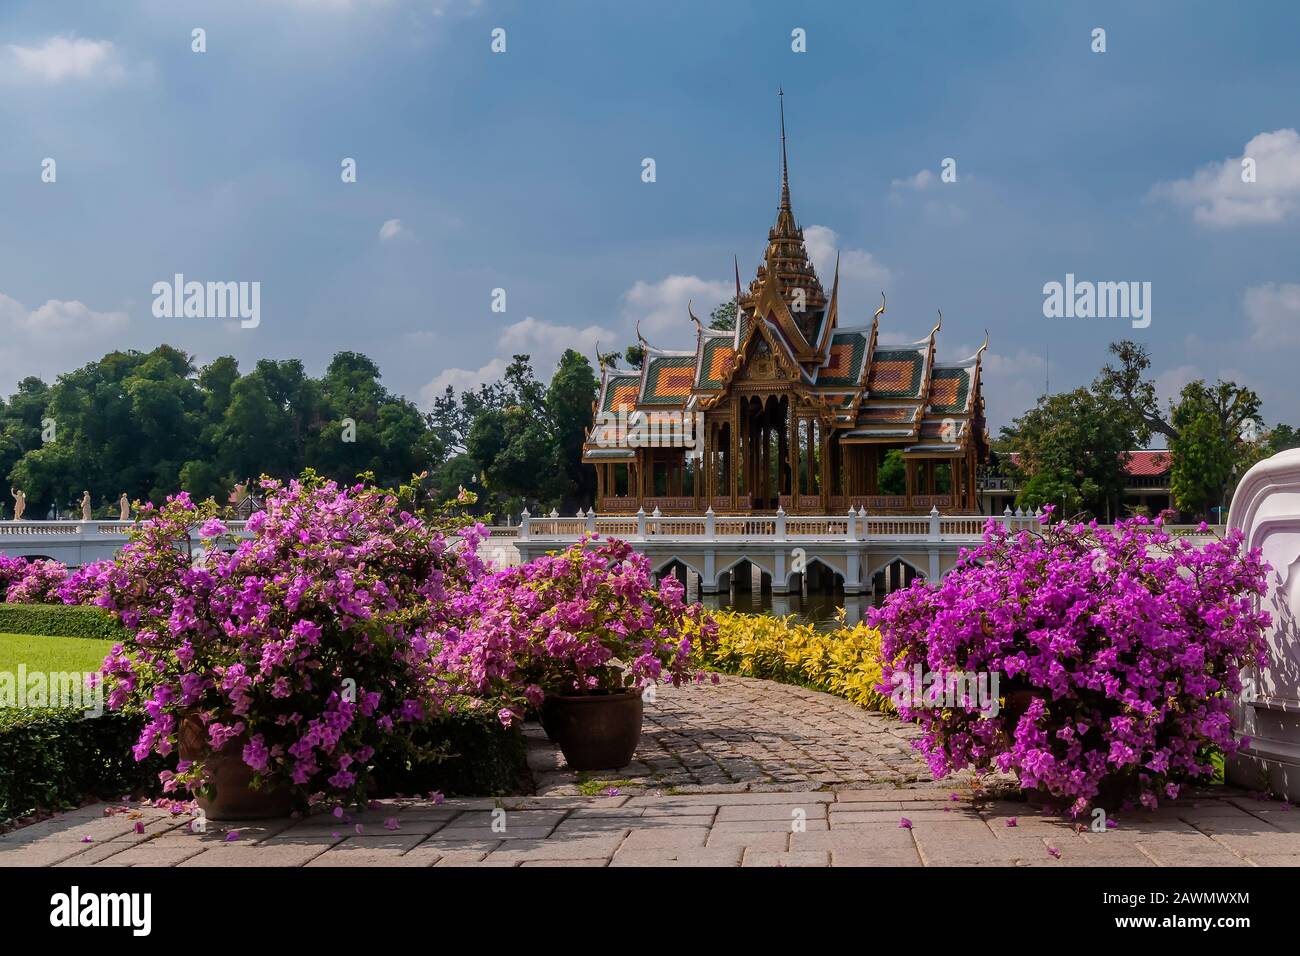 The Aisawan Dhiphya Asana pavilion and the beautiful flowers of the Royal Palace of Bang Pa In, Thailand Stock Photo